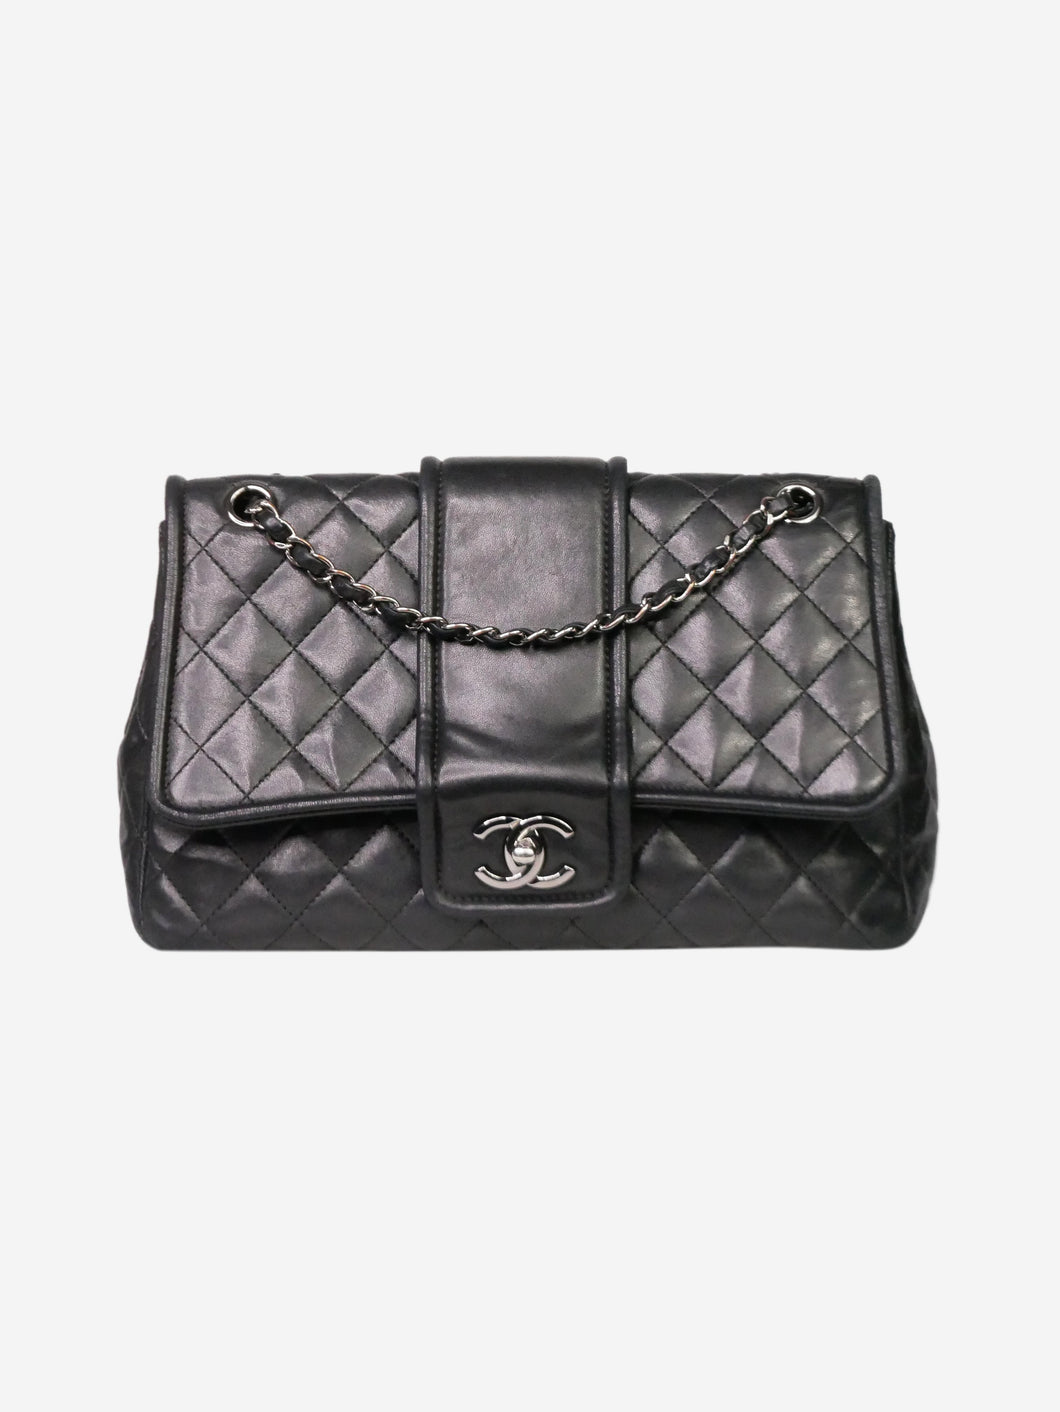 chanel double turnlock bag